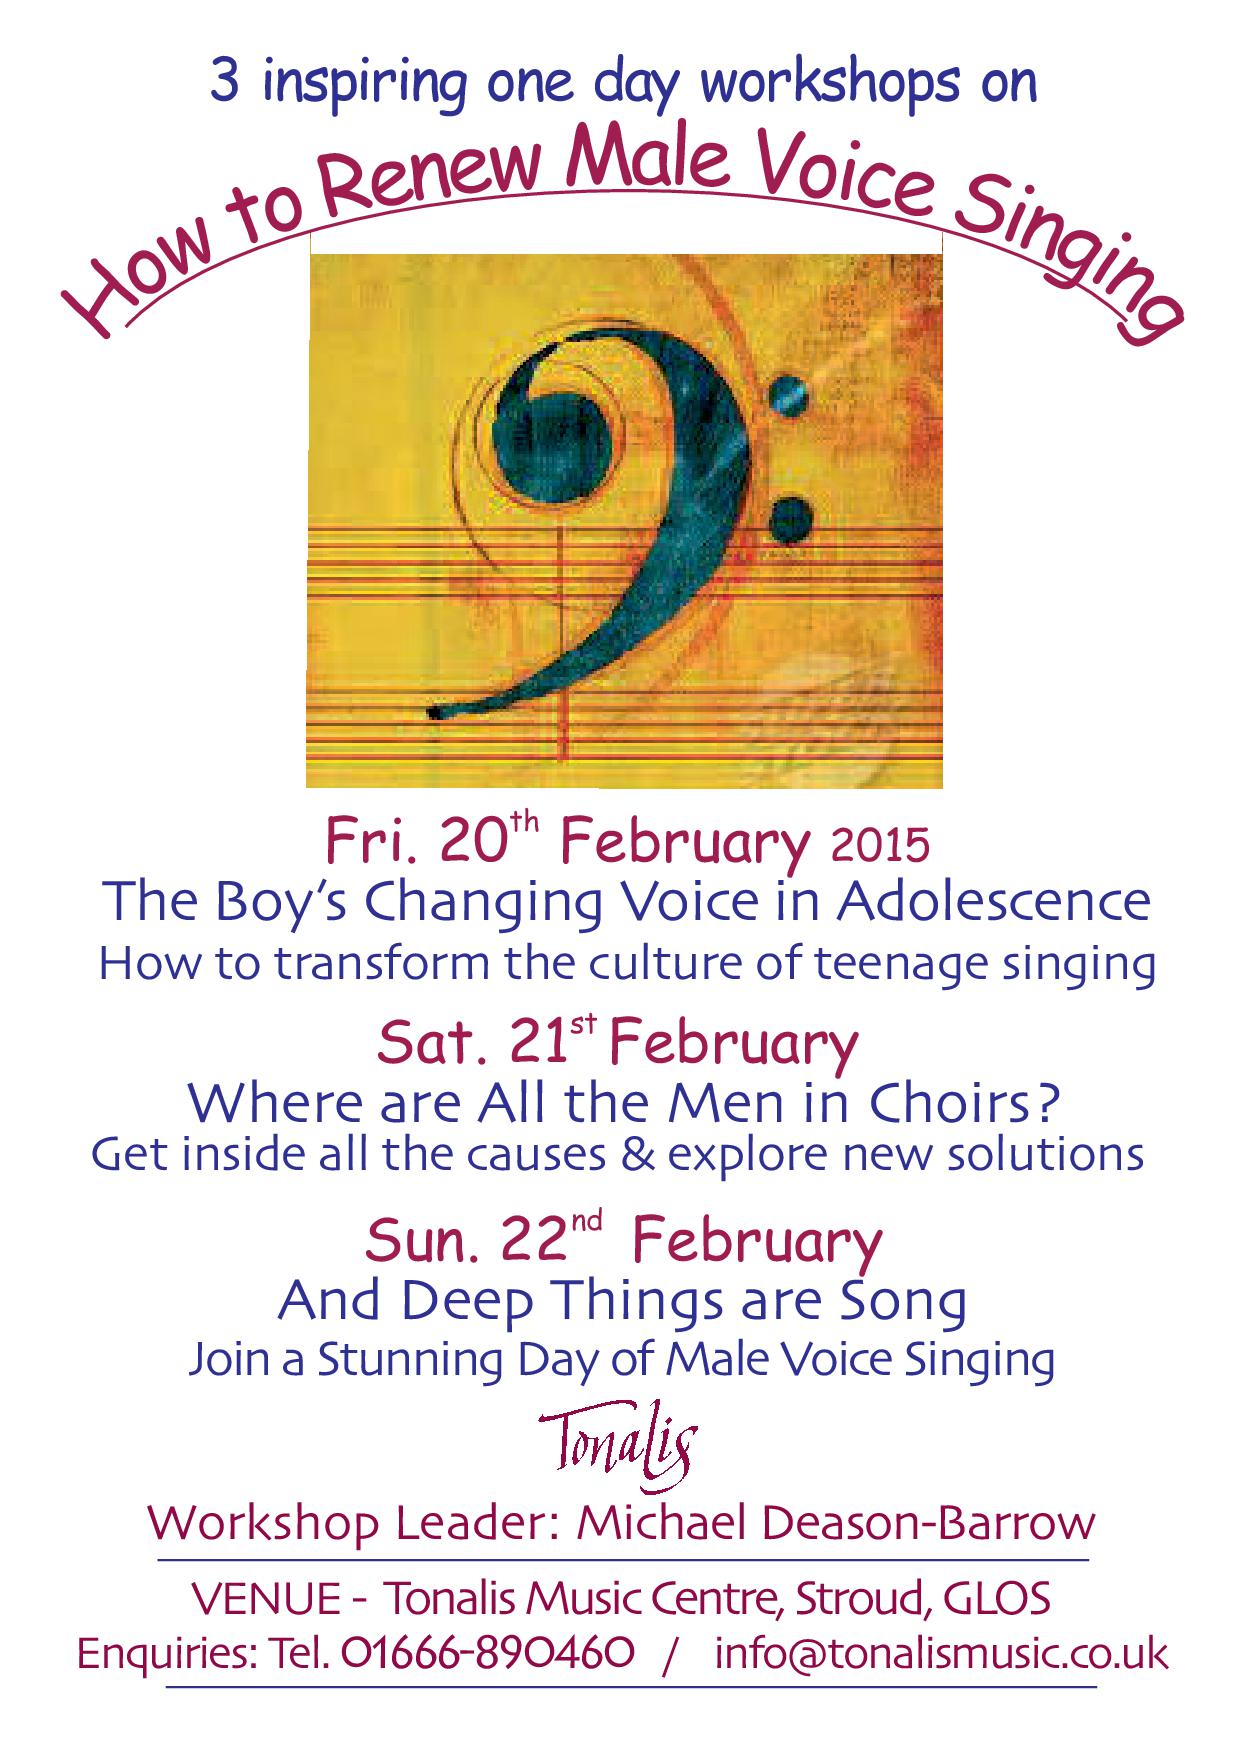 GLOUCESTERSHIRE - How To Renew Male Voice Singing